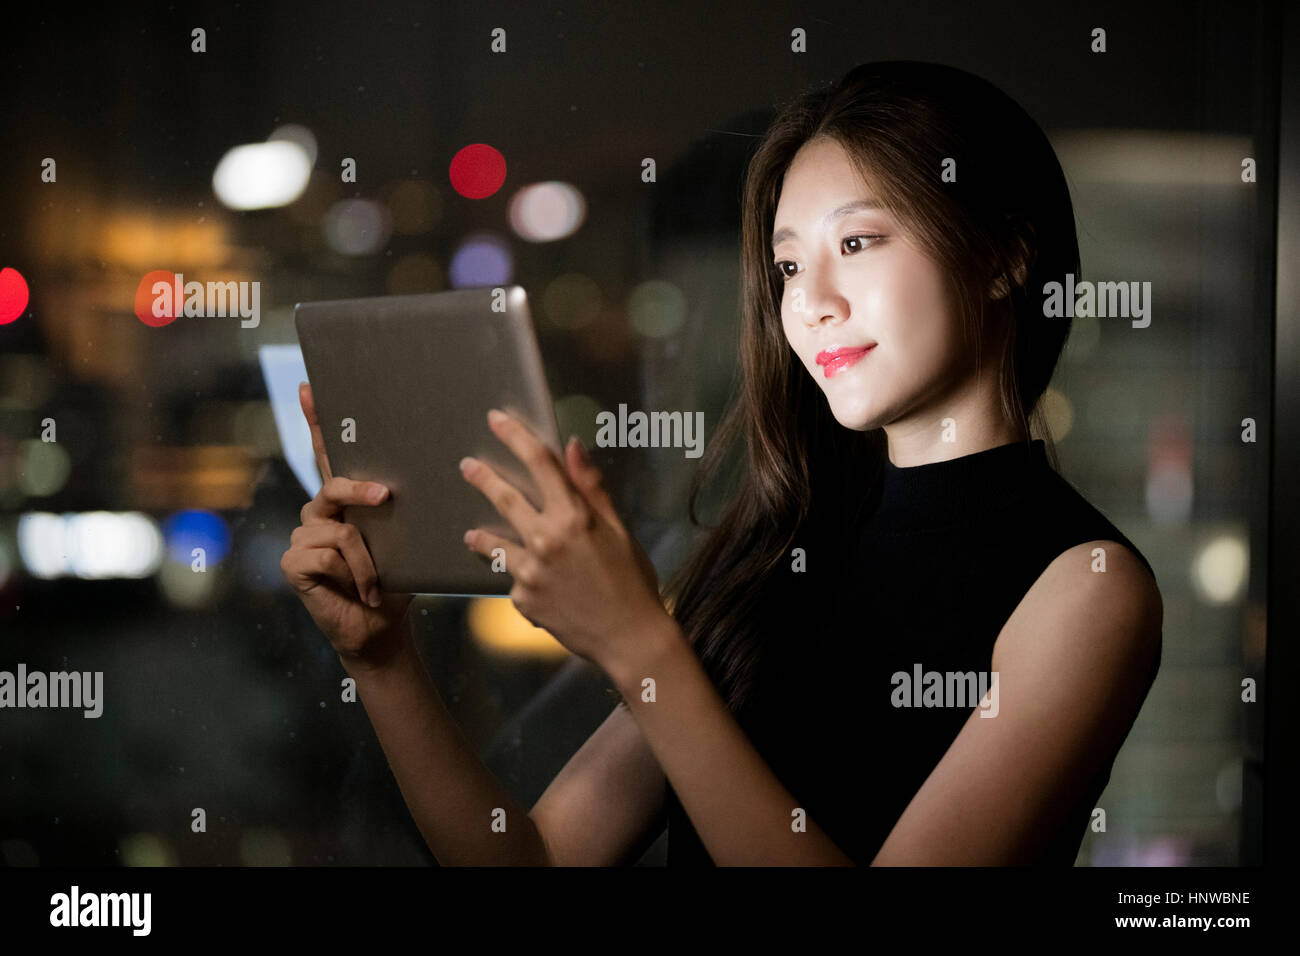 Portrait of young woman using tablet Stock Photo